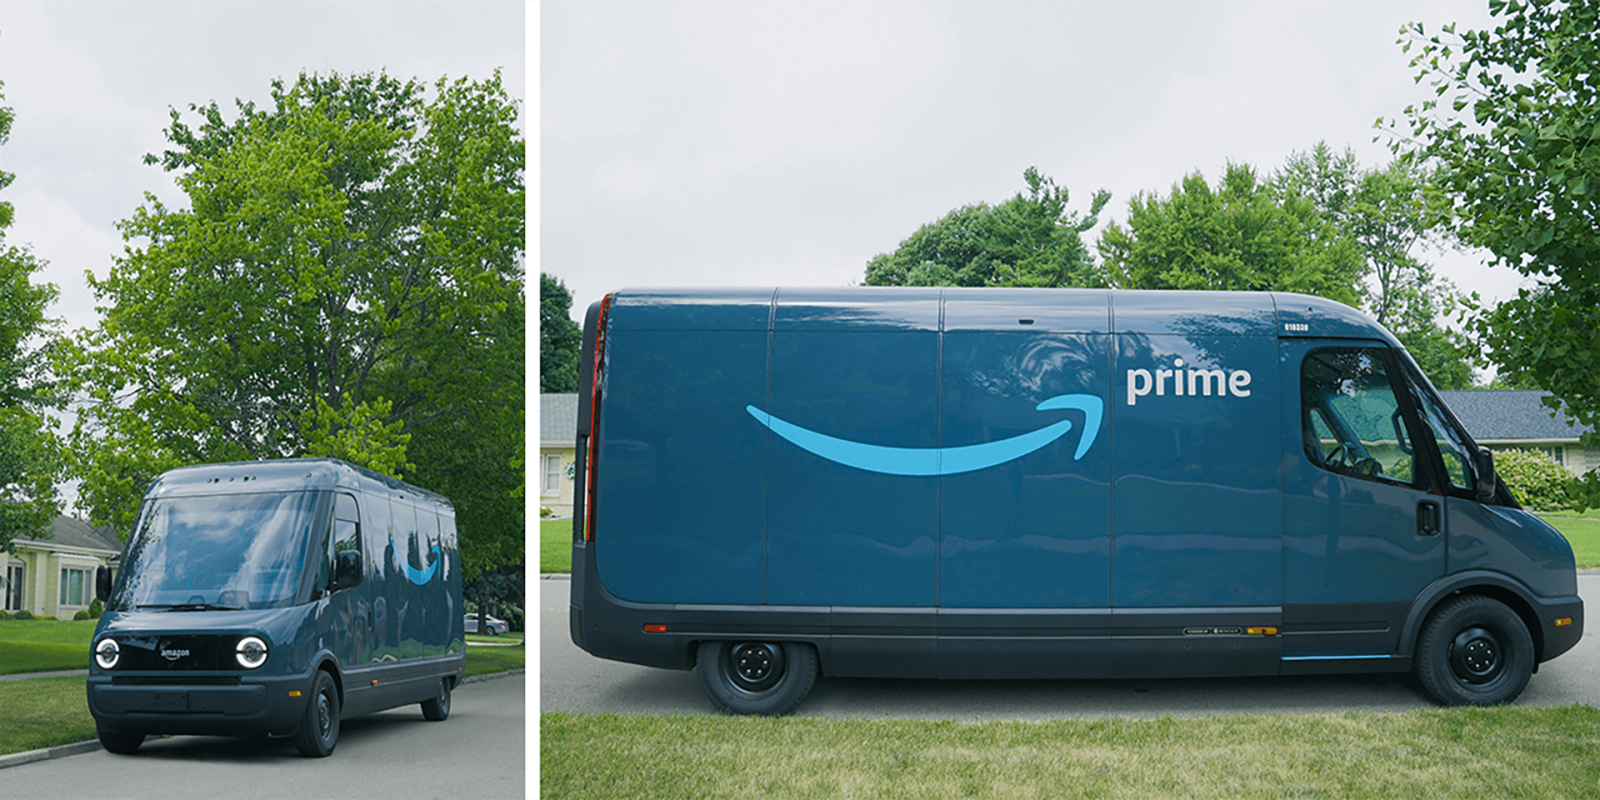 Amazon's new electric Rivian delivery trucks